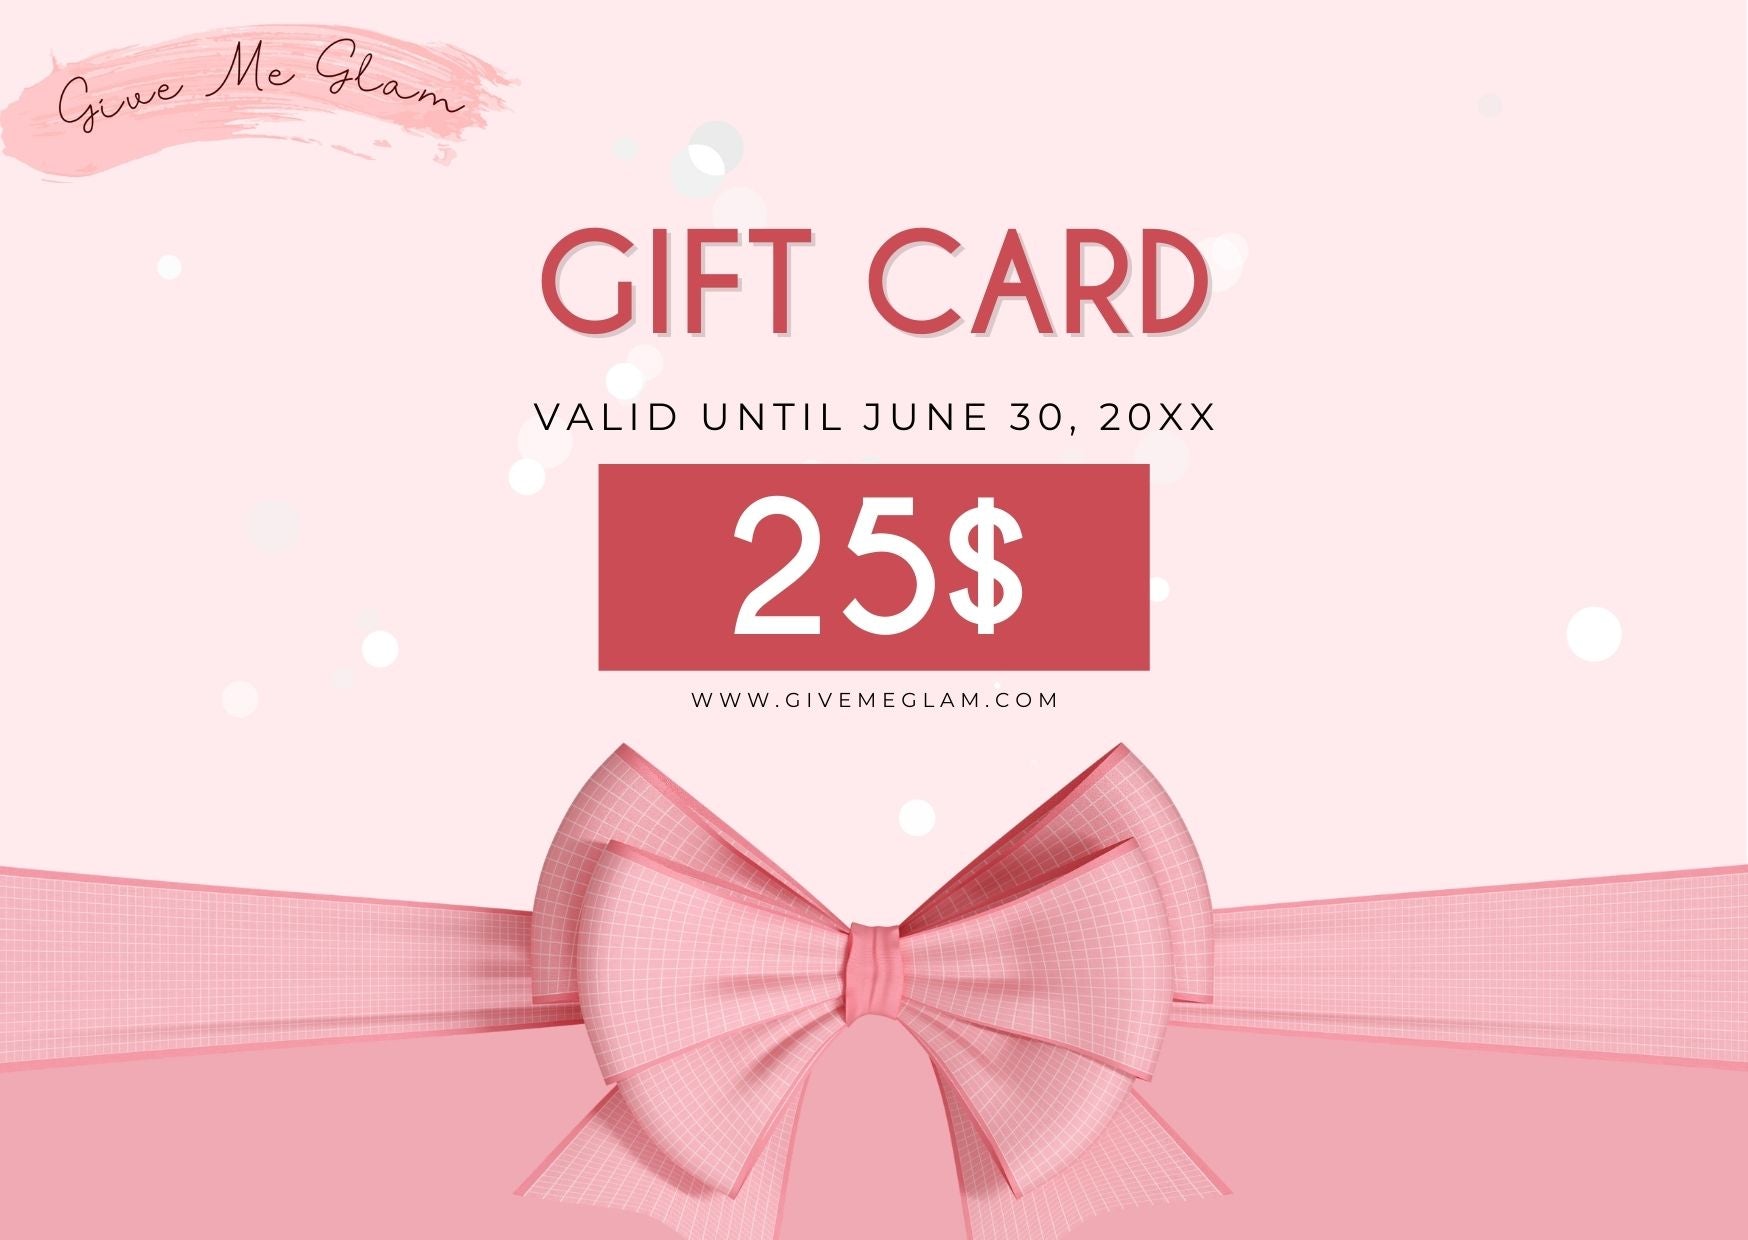 Give Me Glam Gift Card